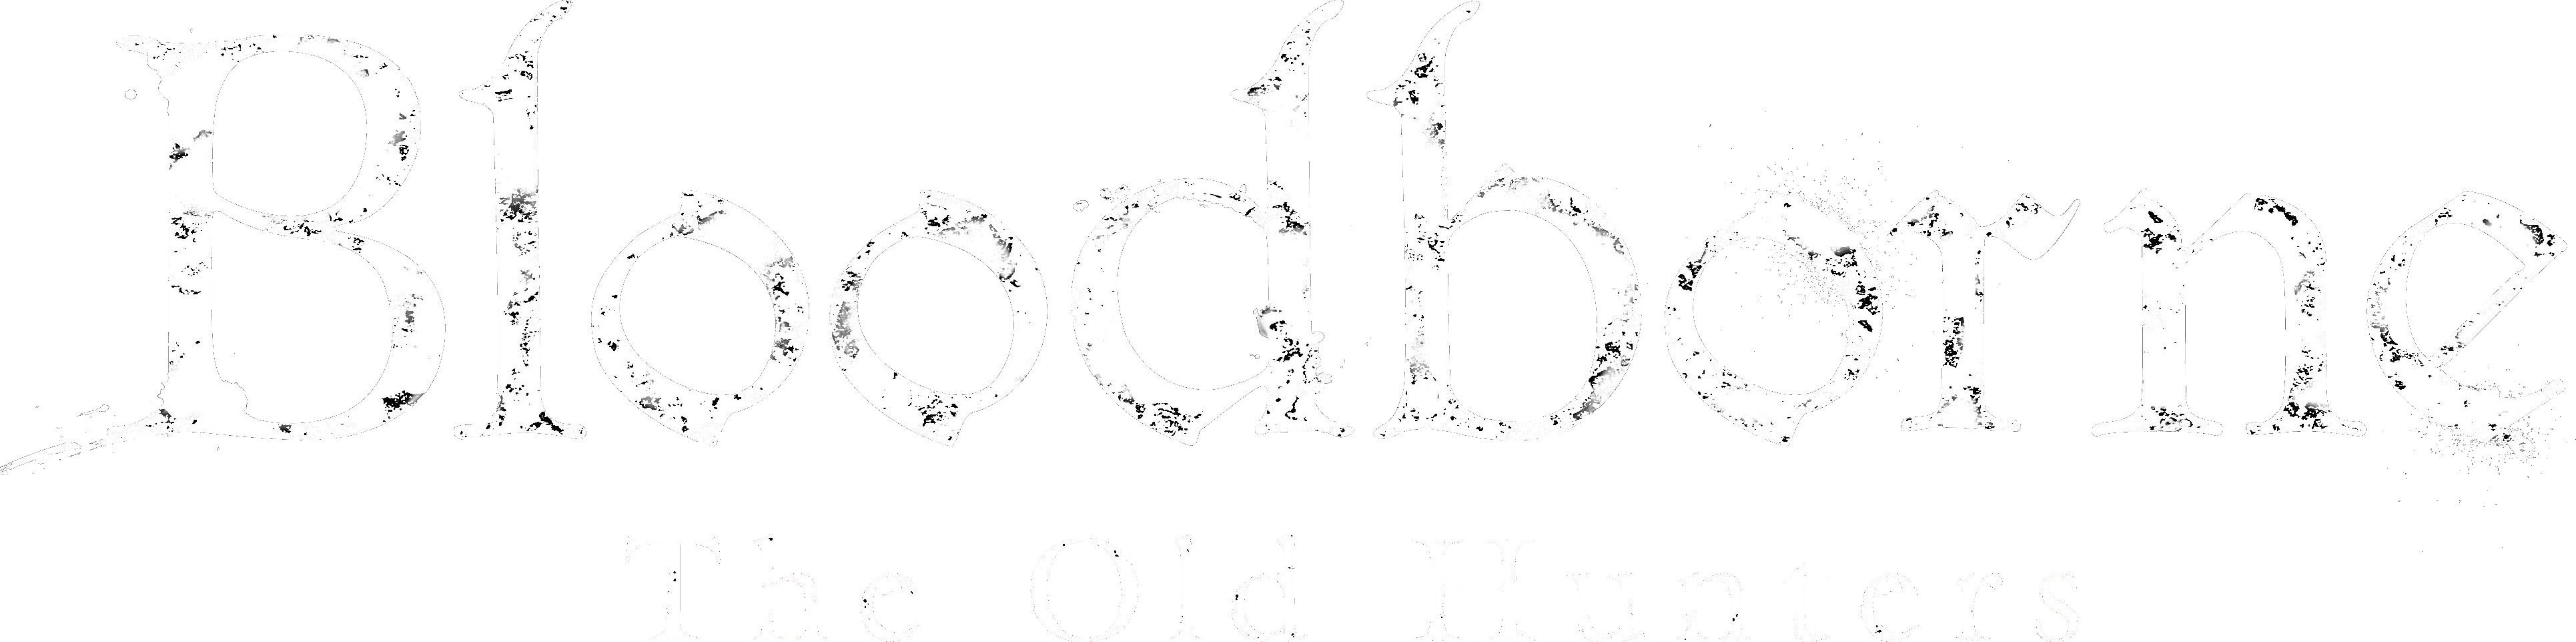 Bloodborne Game PNG Picture